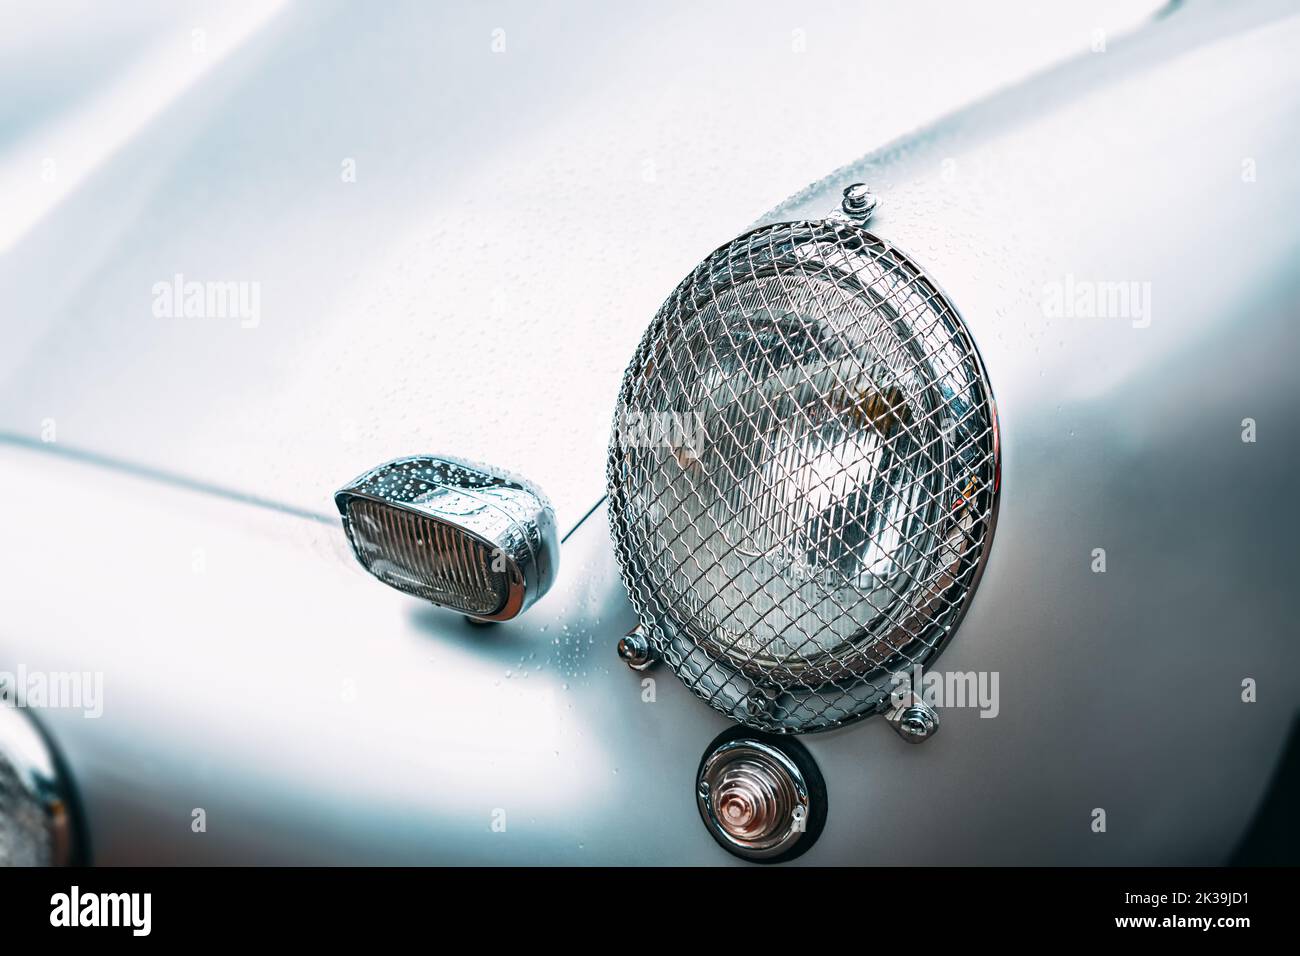 Protective grille on the headlights of a retro vintage car to protect against chips and stones. Stock Photo